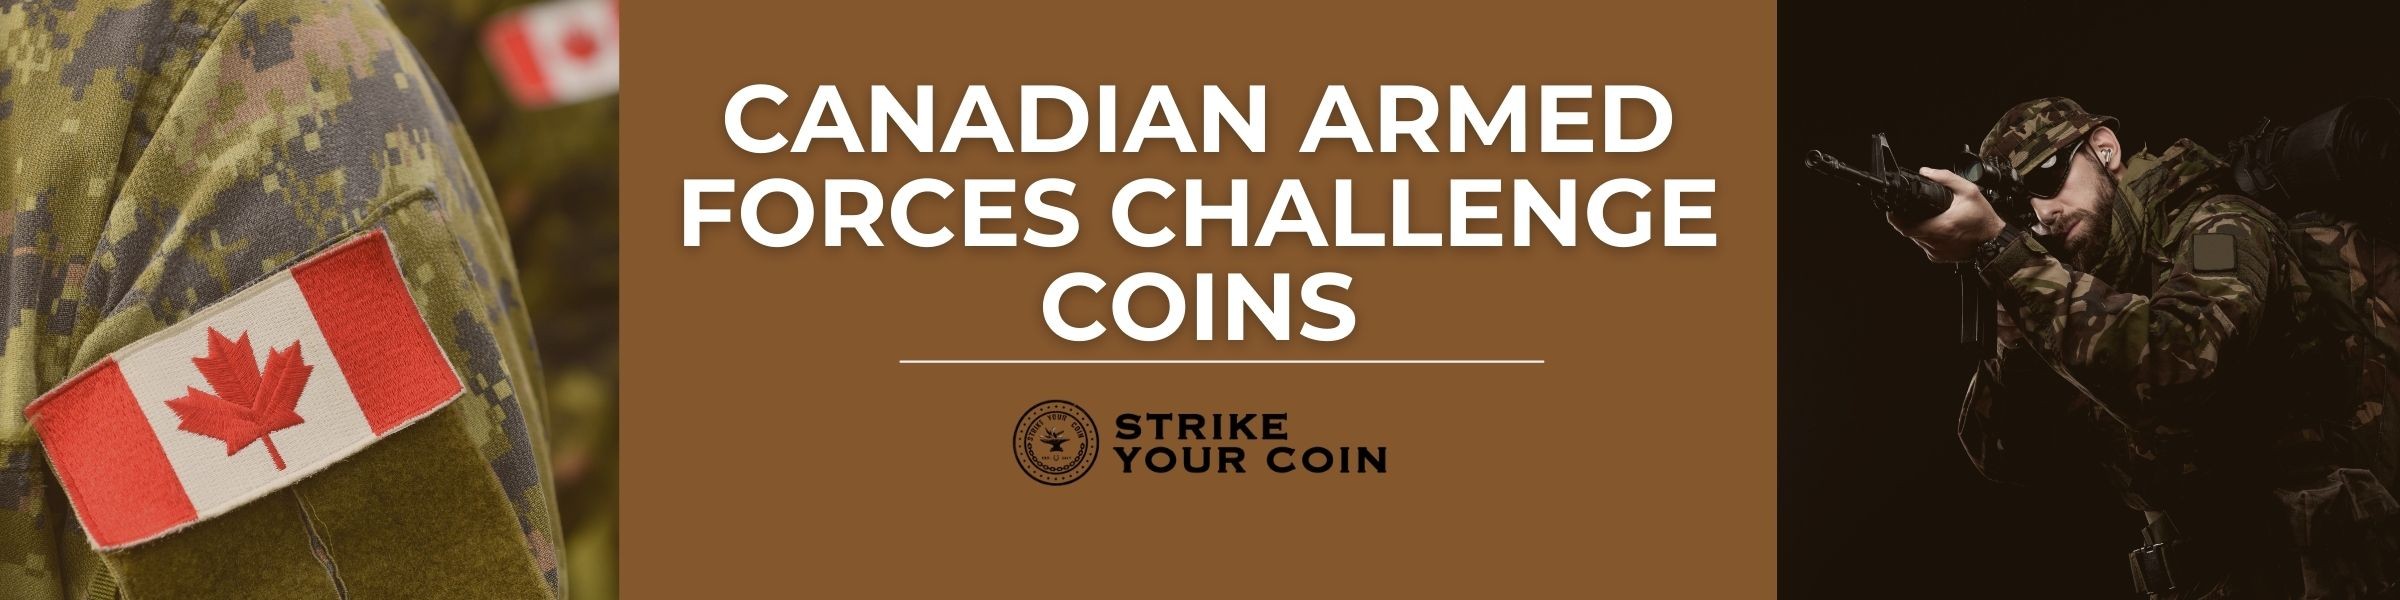 Canadian Armed Forces Challenge Coins